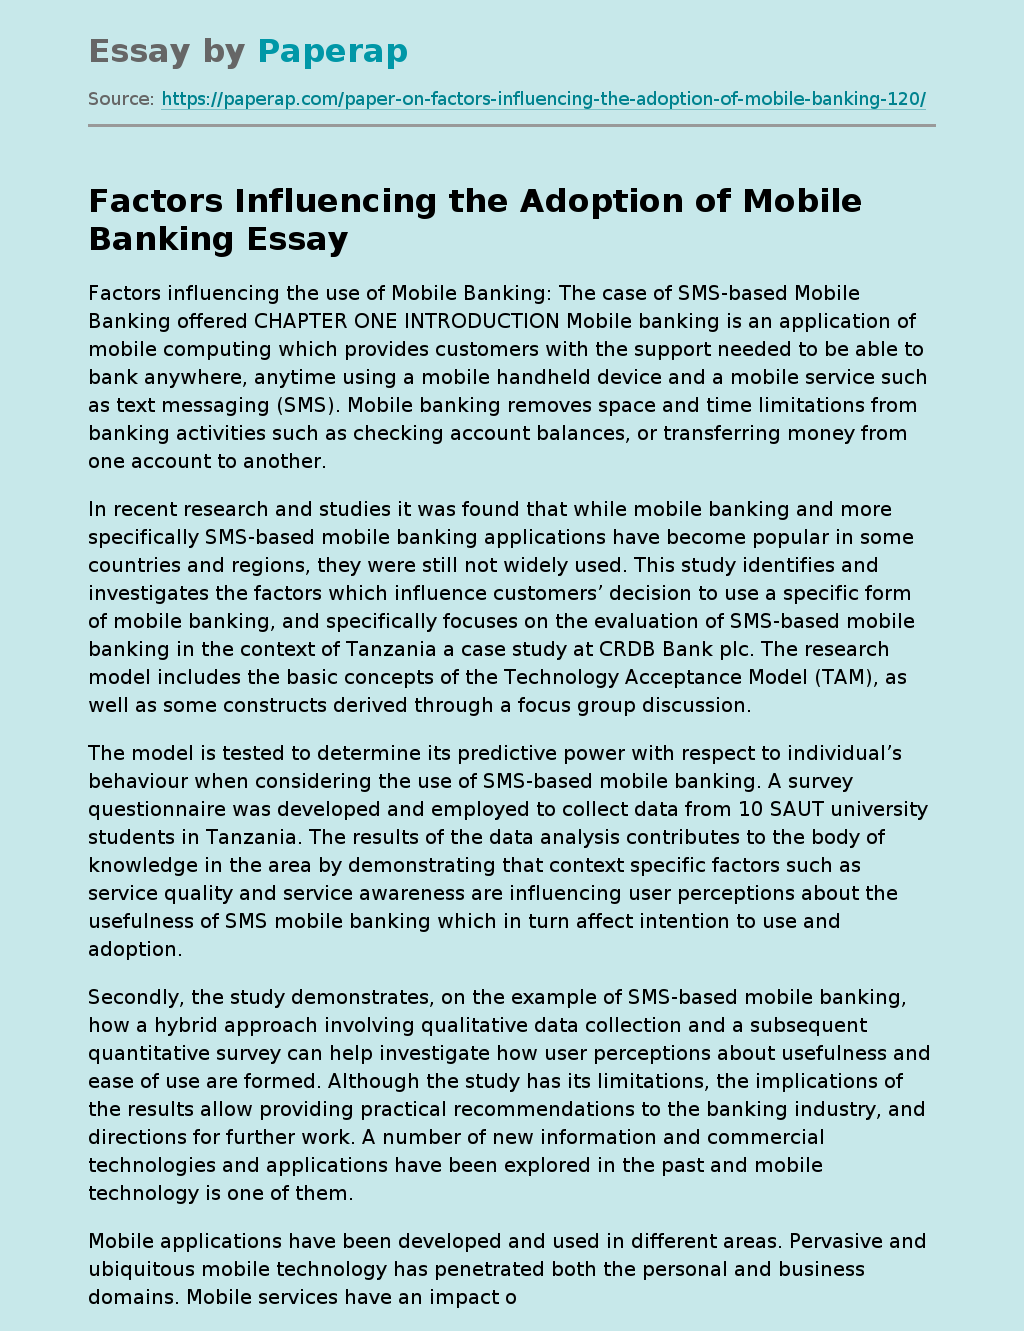 Factors Influencing the Adoption of Mobile Banking